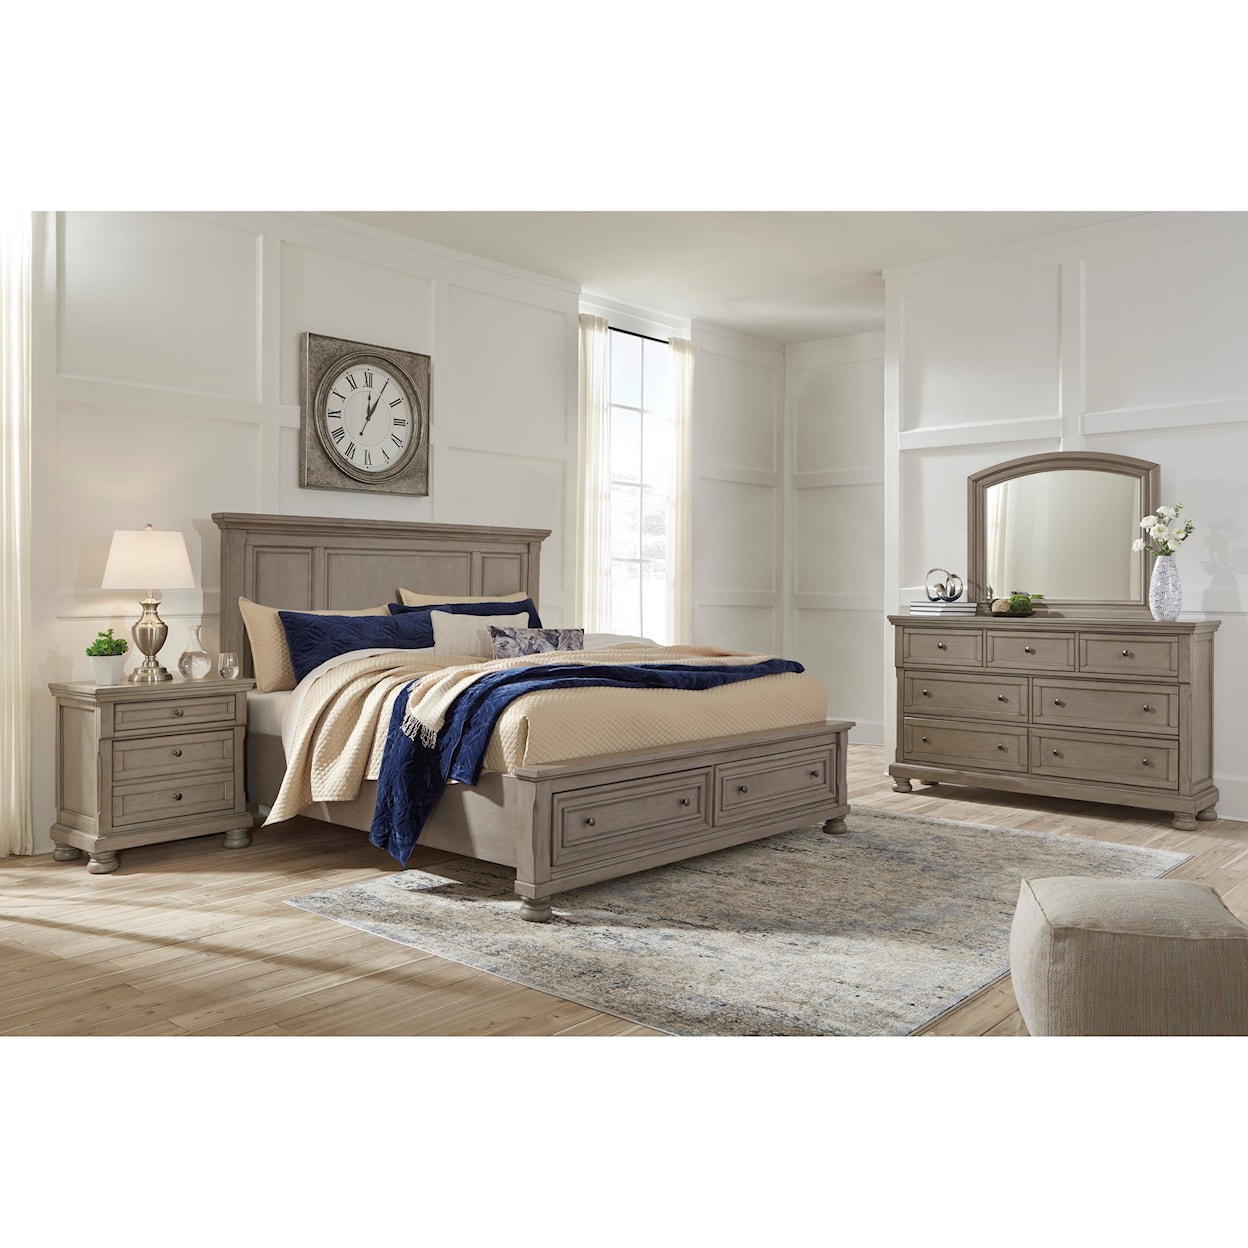 Signature Design by Ashley Lettner Queen Bedroom Group